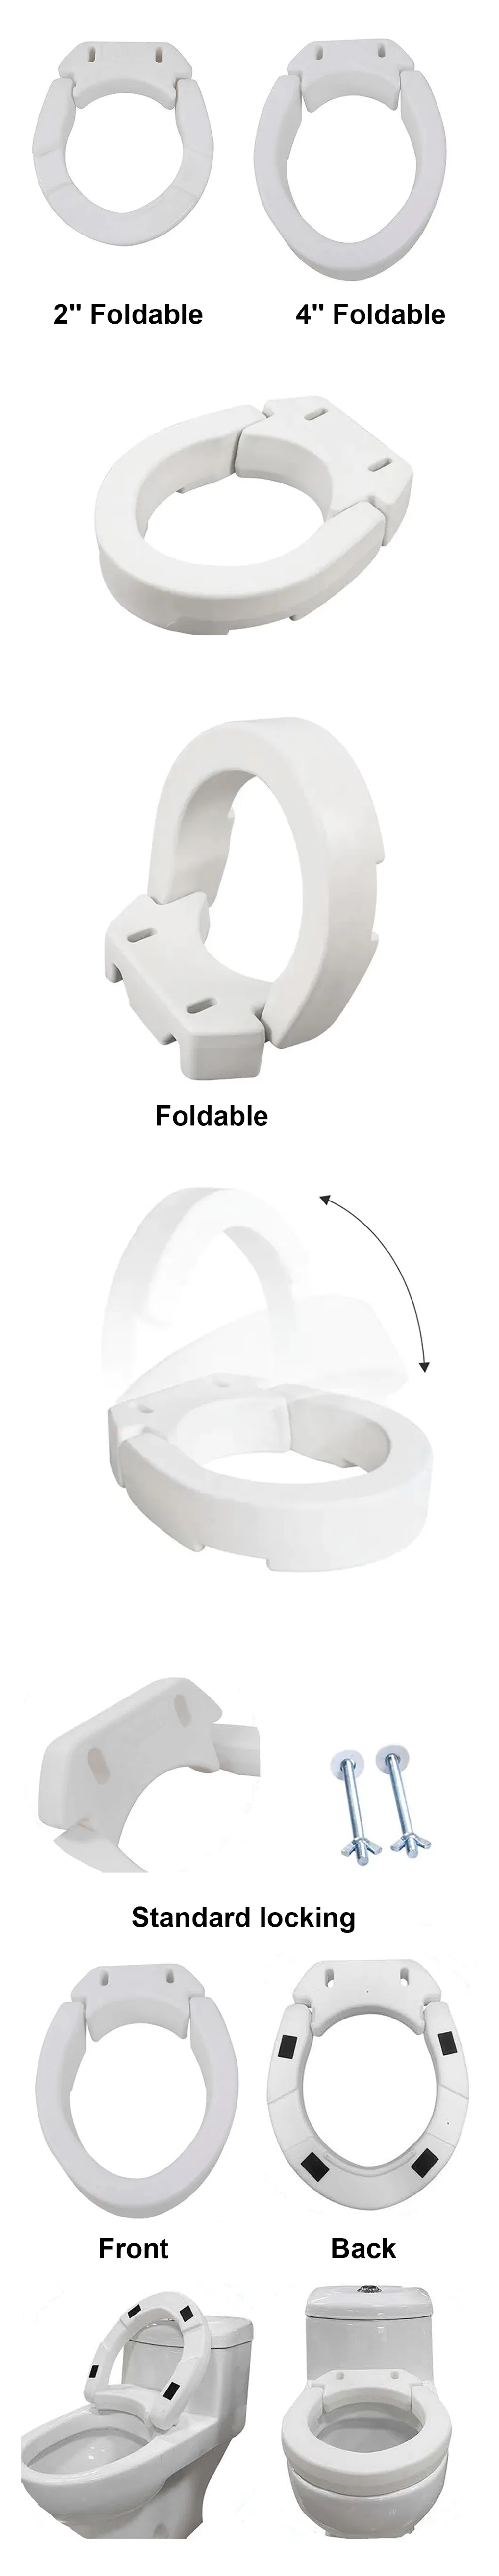 Standard 2′ ′ Us-Style Raised Toilet Seat Elevator with Handles Commode Chair Safety